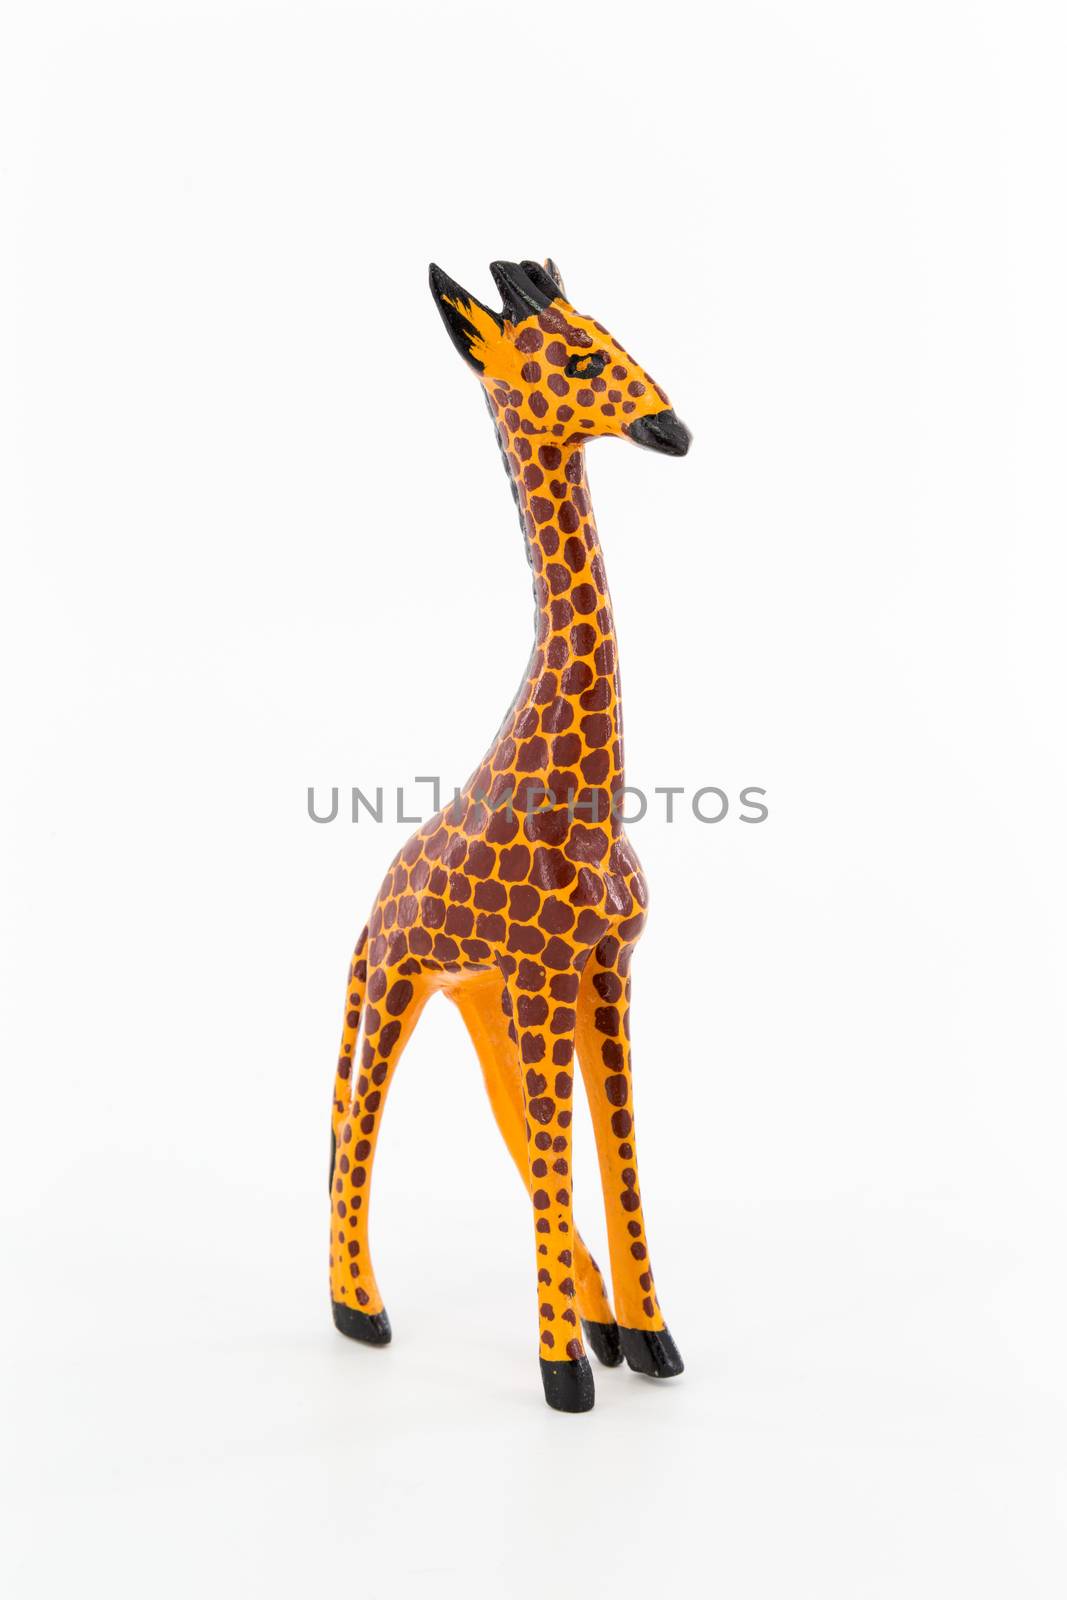 A wooden figure of a giraffe on white background